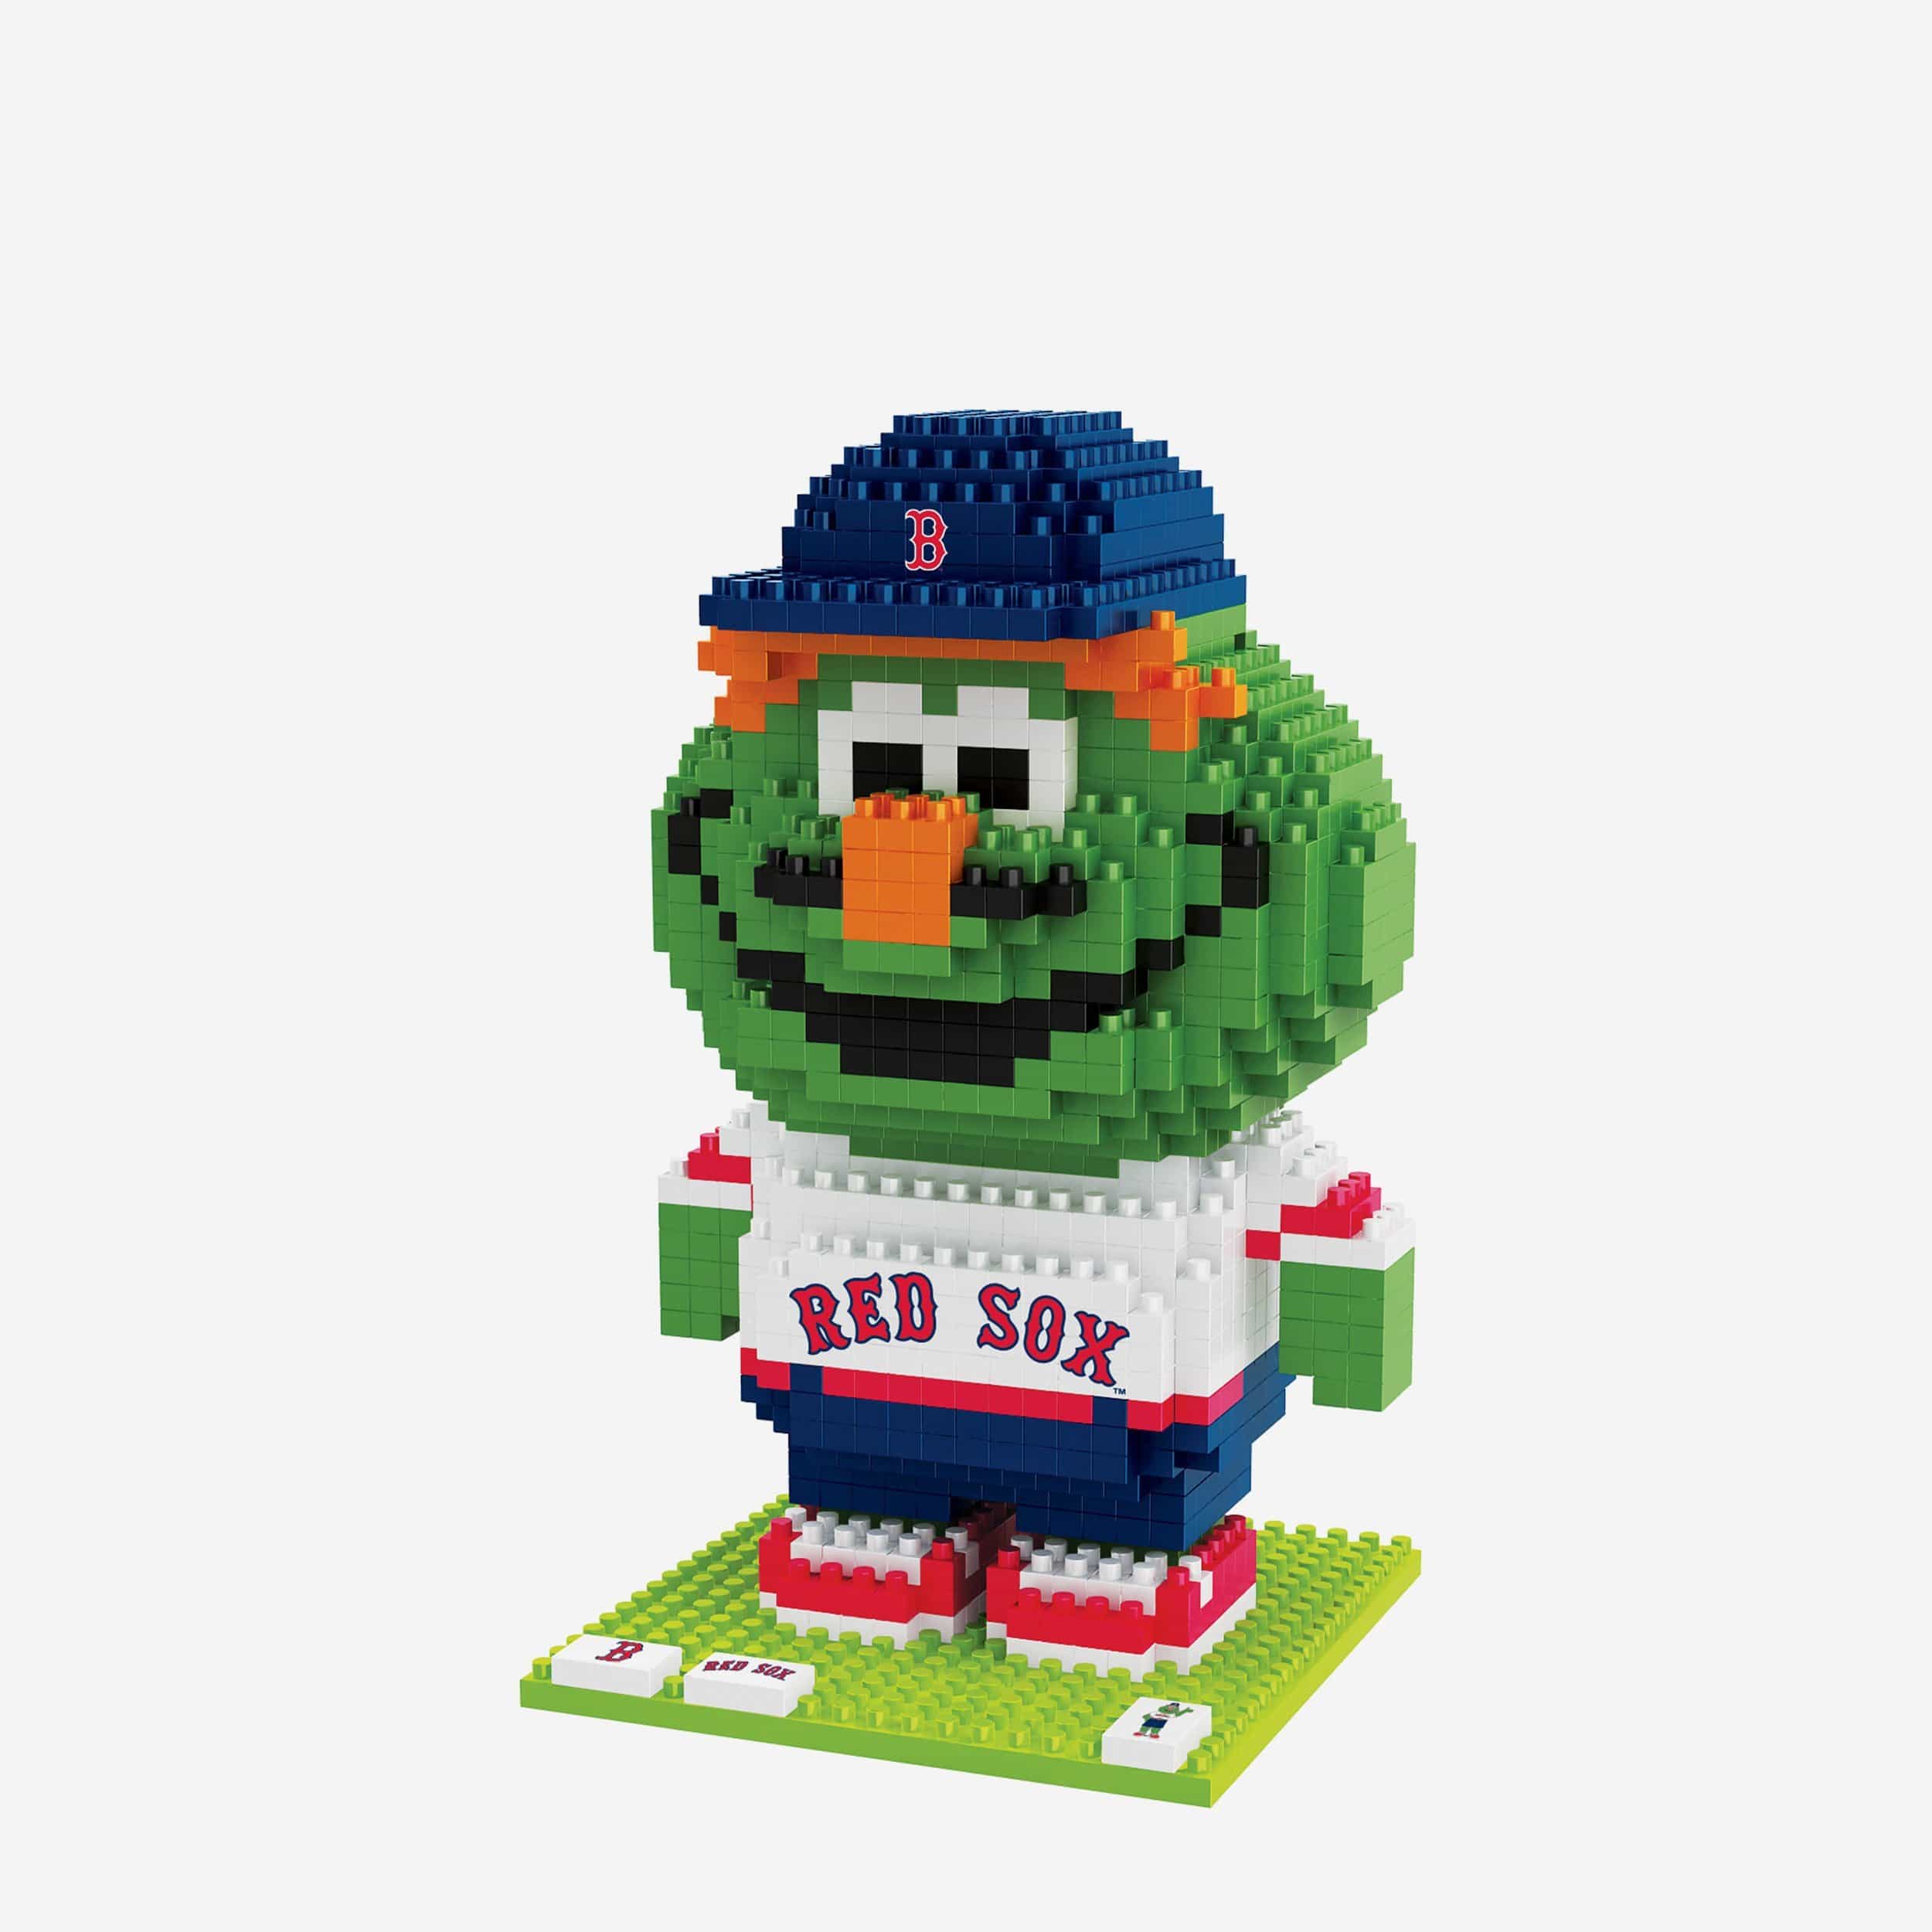 Wally The Green Monster Boston Red Sox Mascot 500 Piece Jigsaw Puzzle PZLZ 3D Puzzle, Ages: 12+, Officially Licensed by MLB